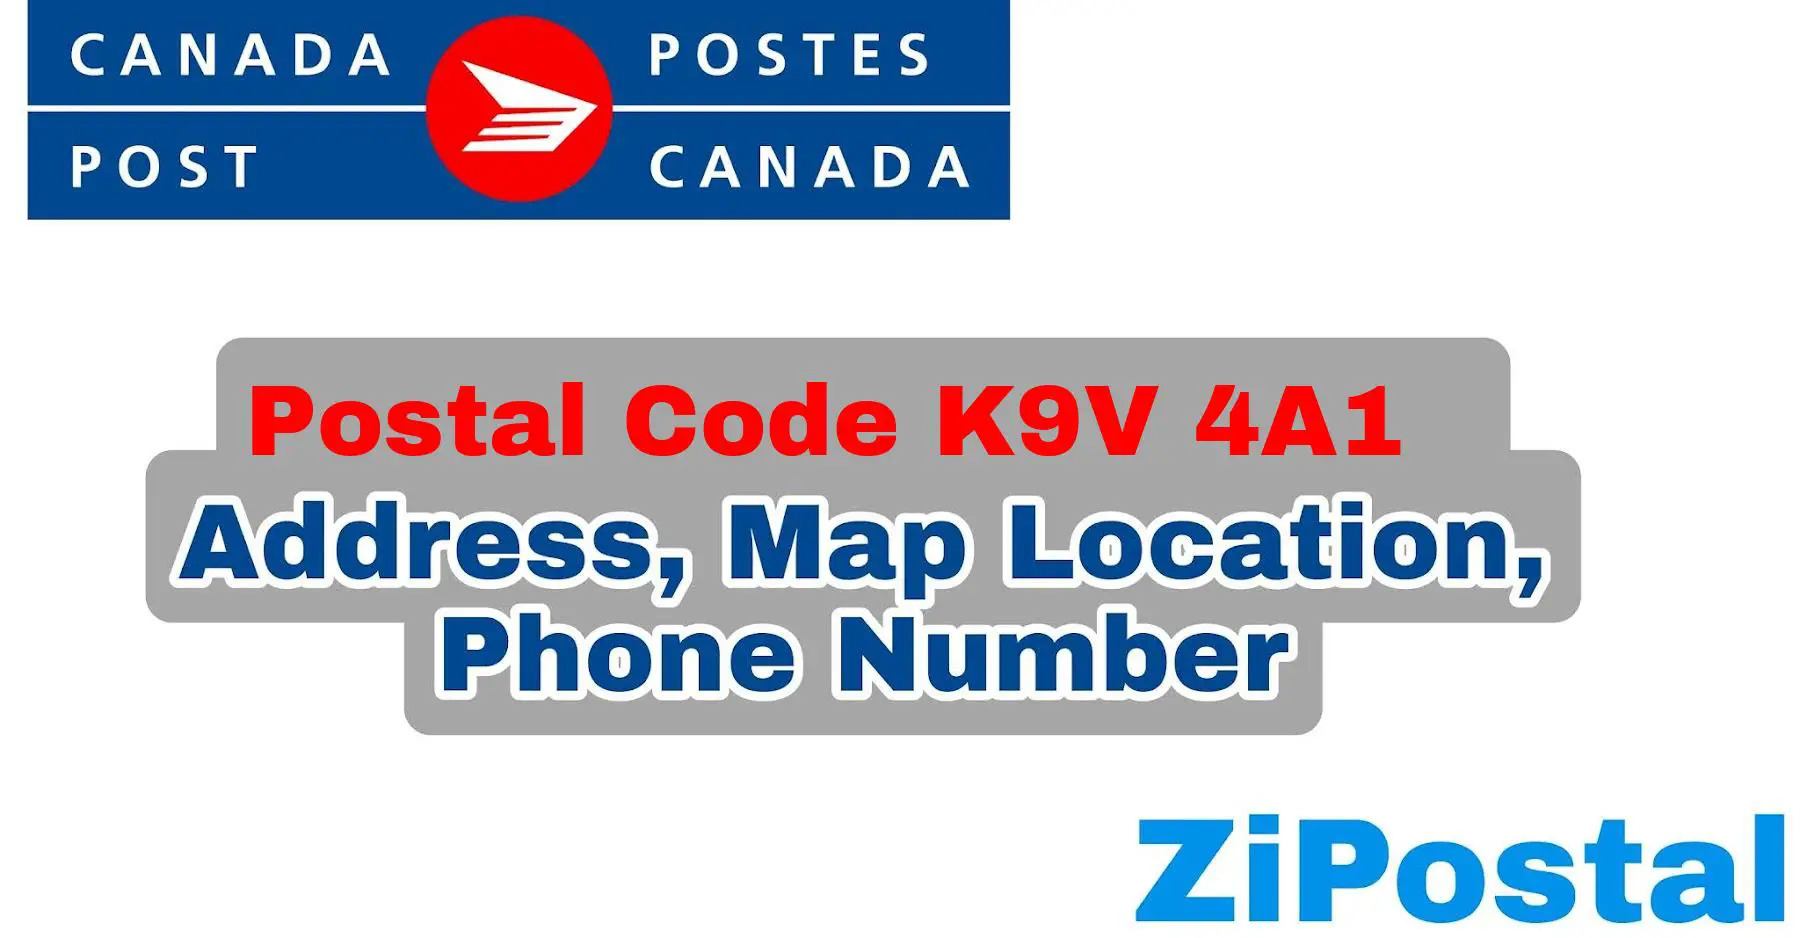 Postal Code K9V 4A1 Address Map Location and Phone Number